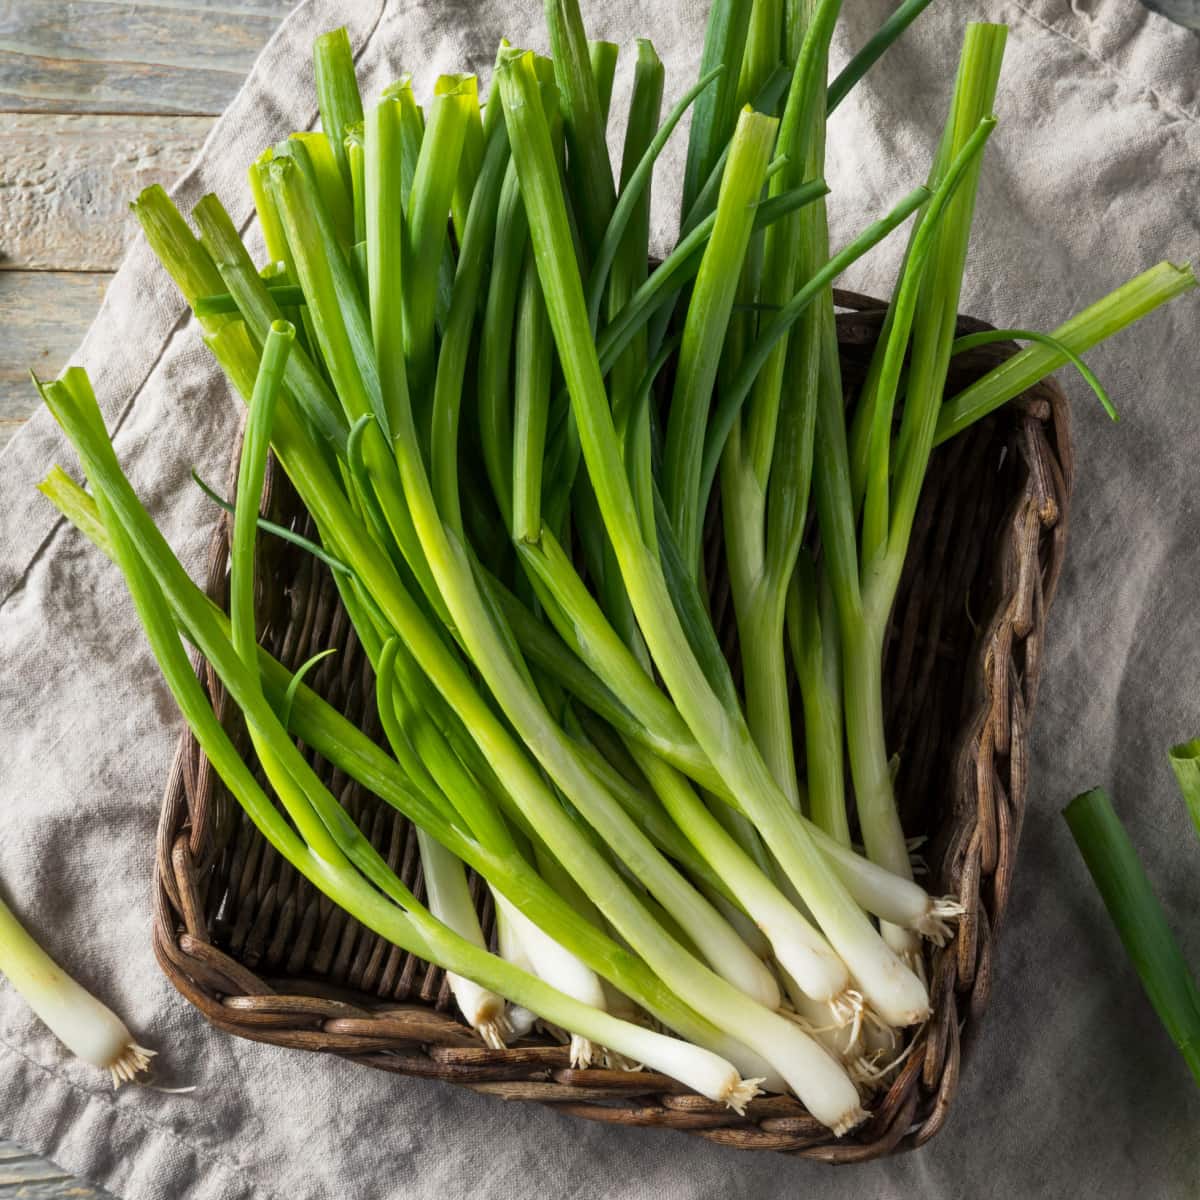 Bunch of Green Onions on a Woven Basket 